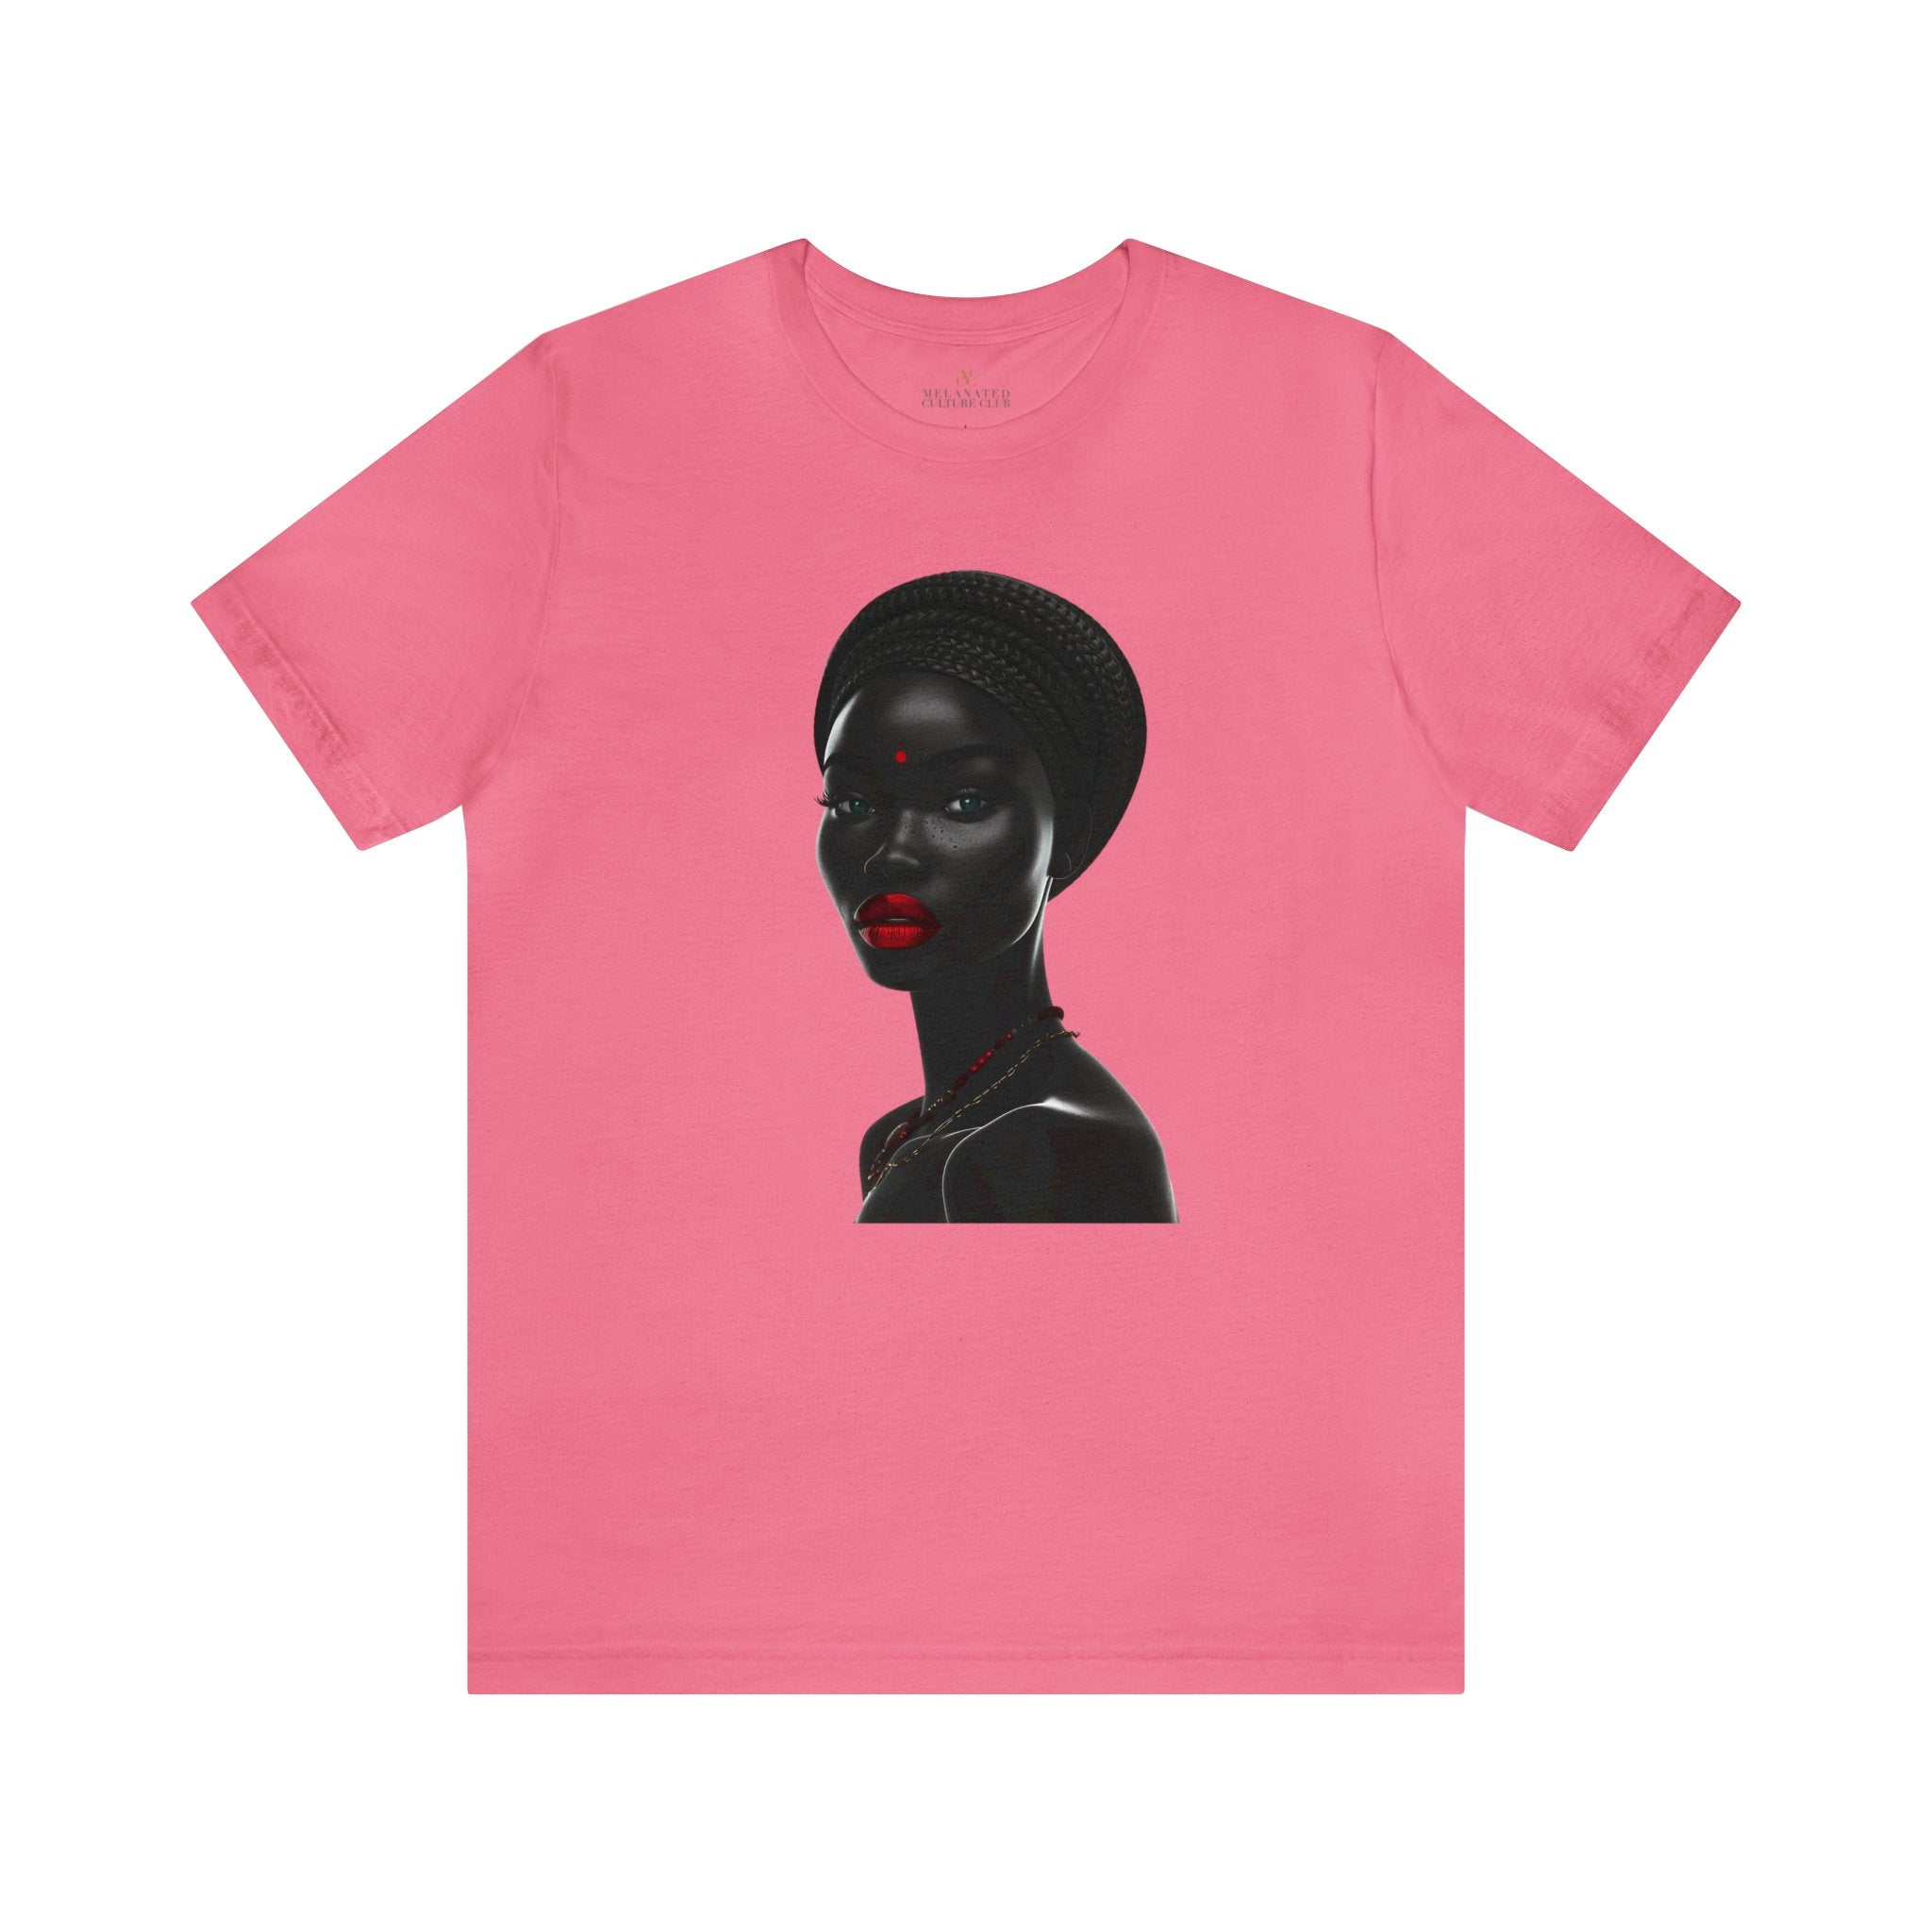 Afrocentric Black Beauty tee shirt in pink.